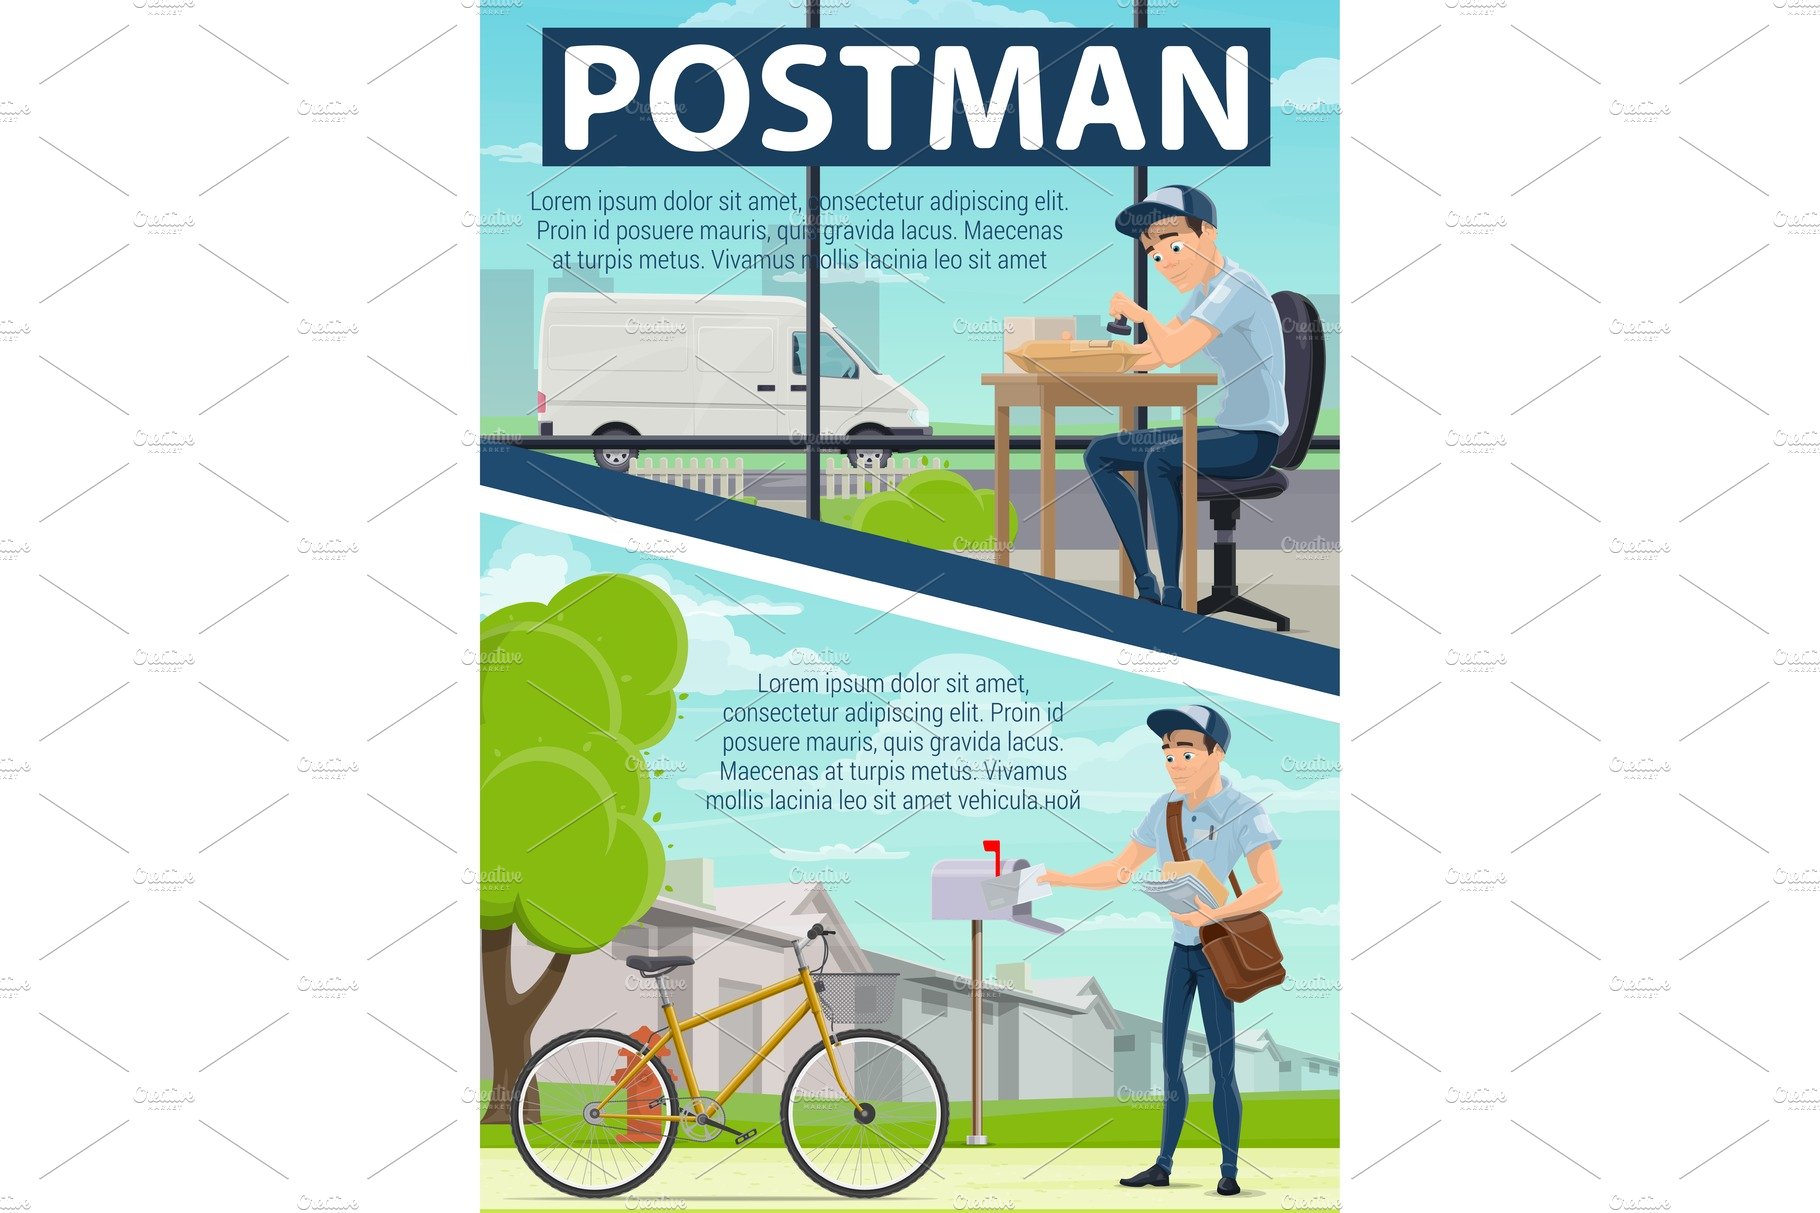 Postman, post office and mail cover image.